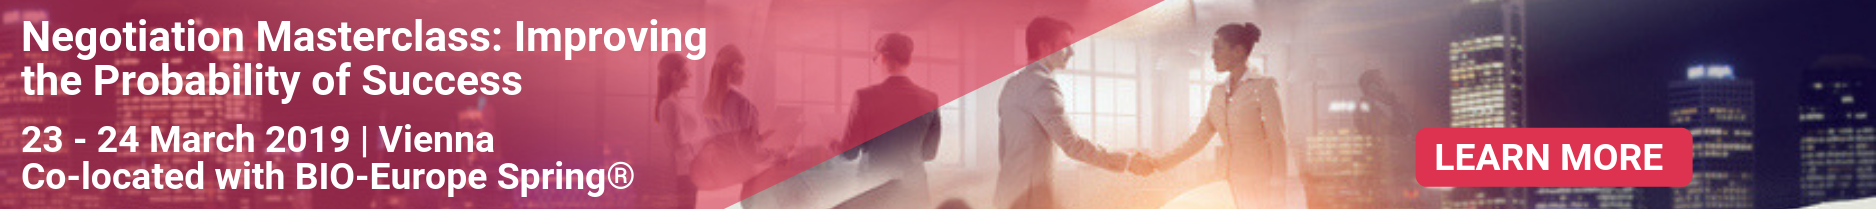 Negotiation Masterclass _ EBD Group _ Article Banner